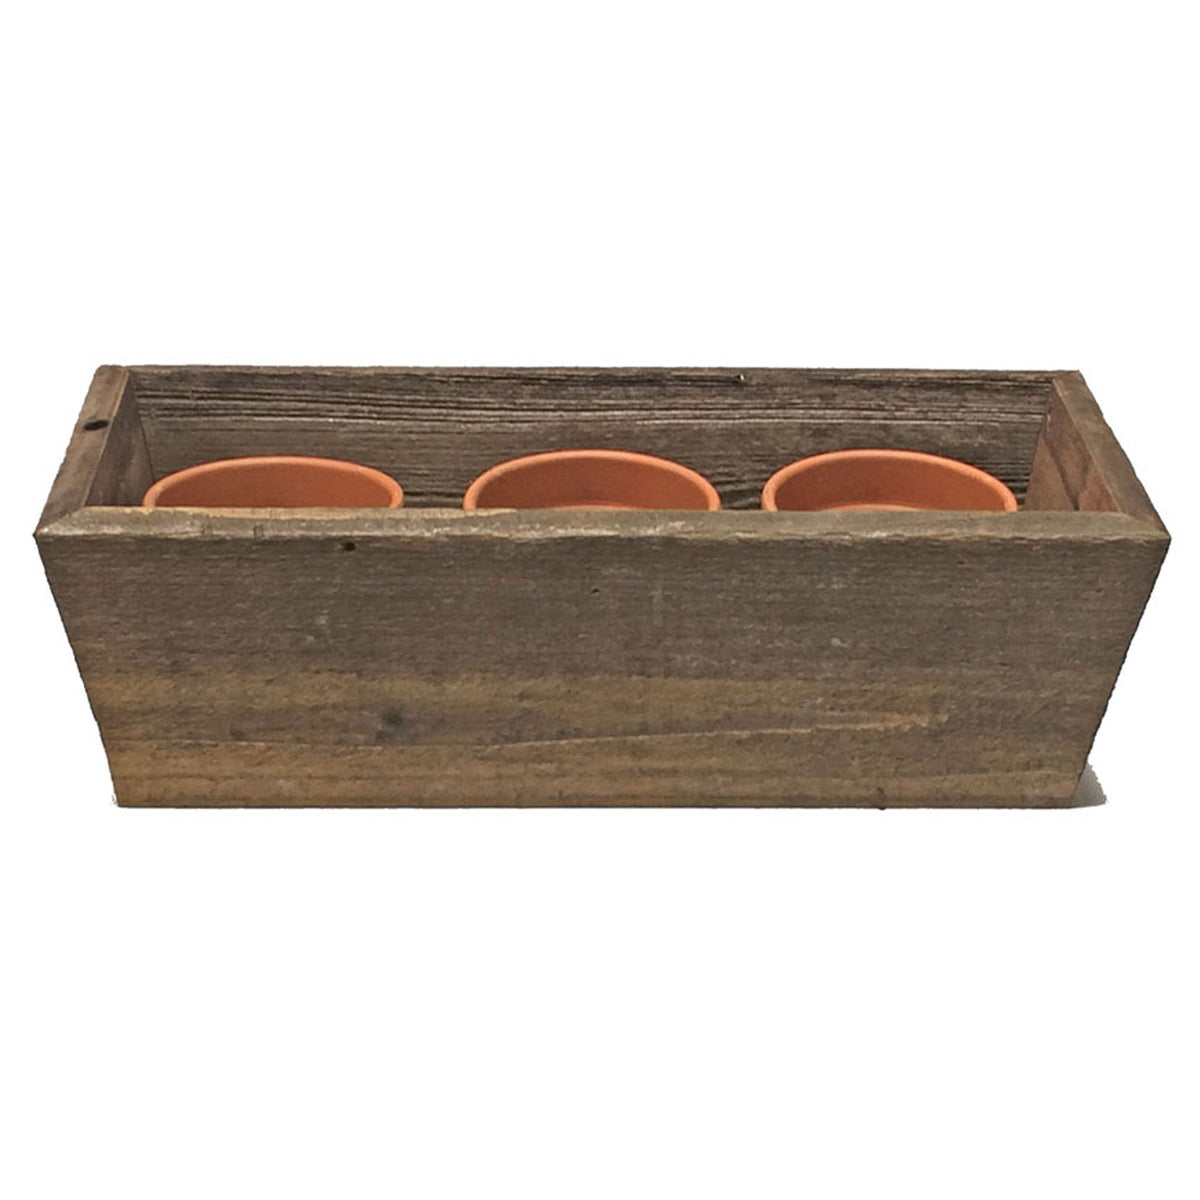 Tapered Wooden Planters Box